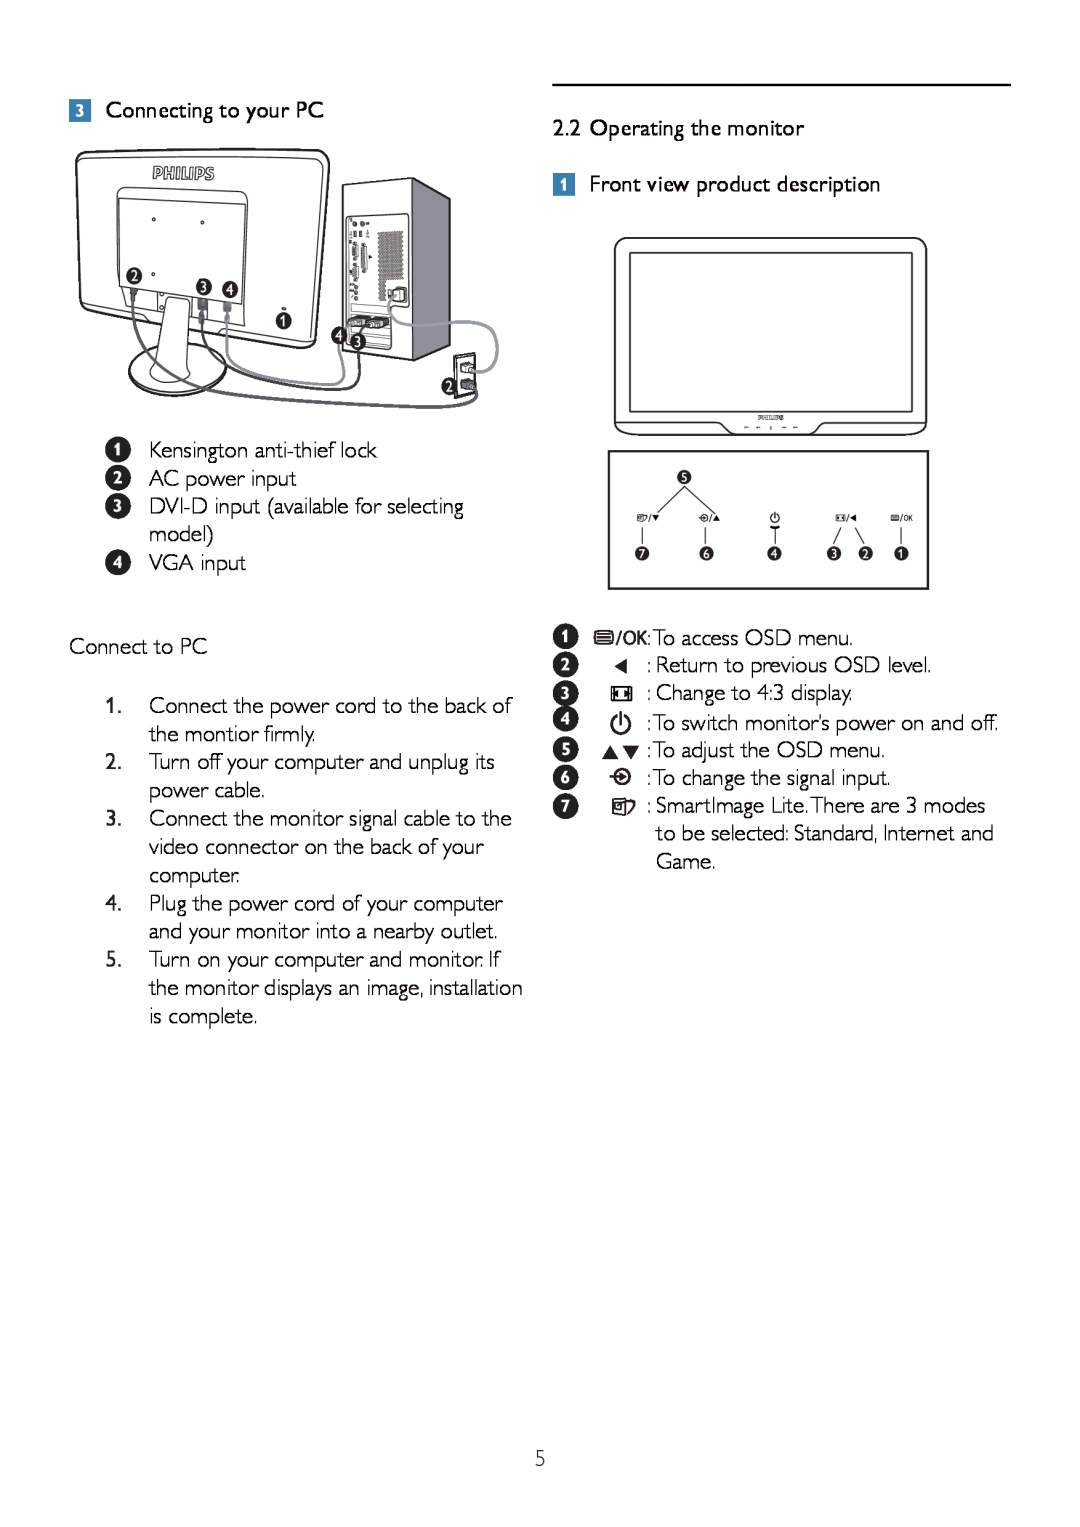 Philips 192E2SB2 user manual Connecting to your PC 2.2 Operating the monitor, Front view product description, Connect to PC 